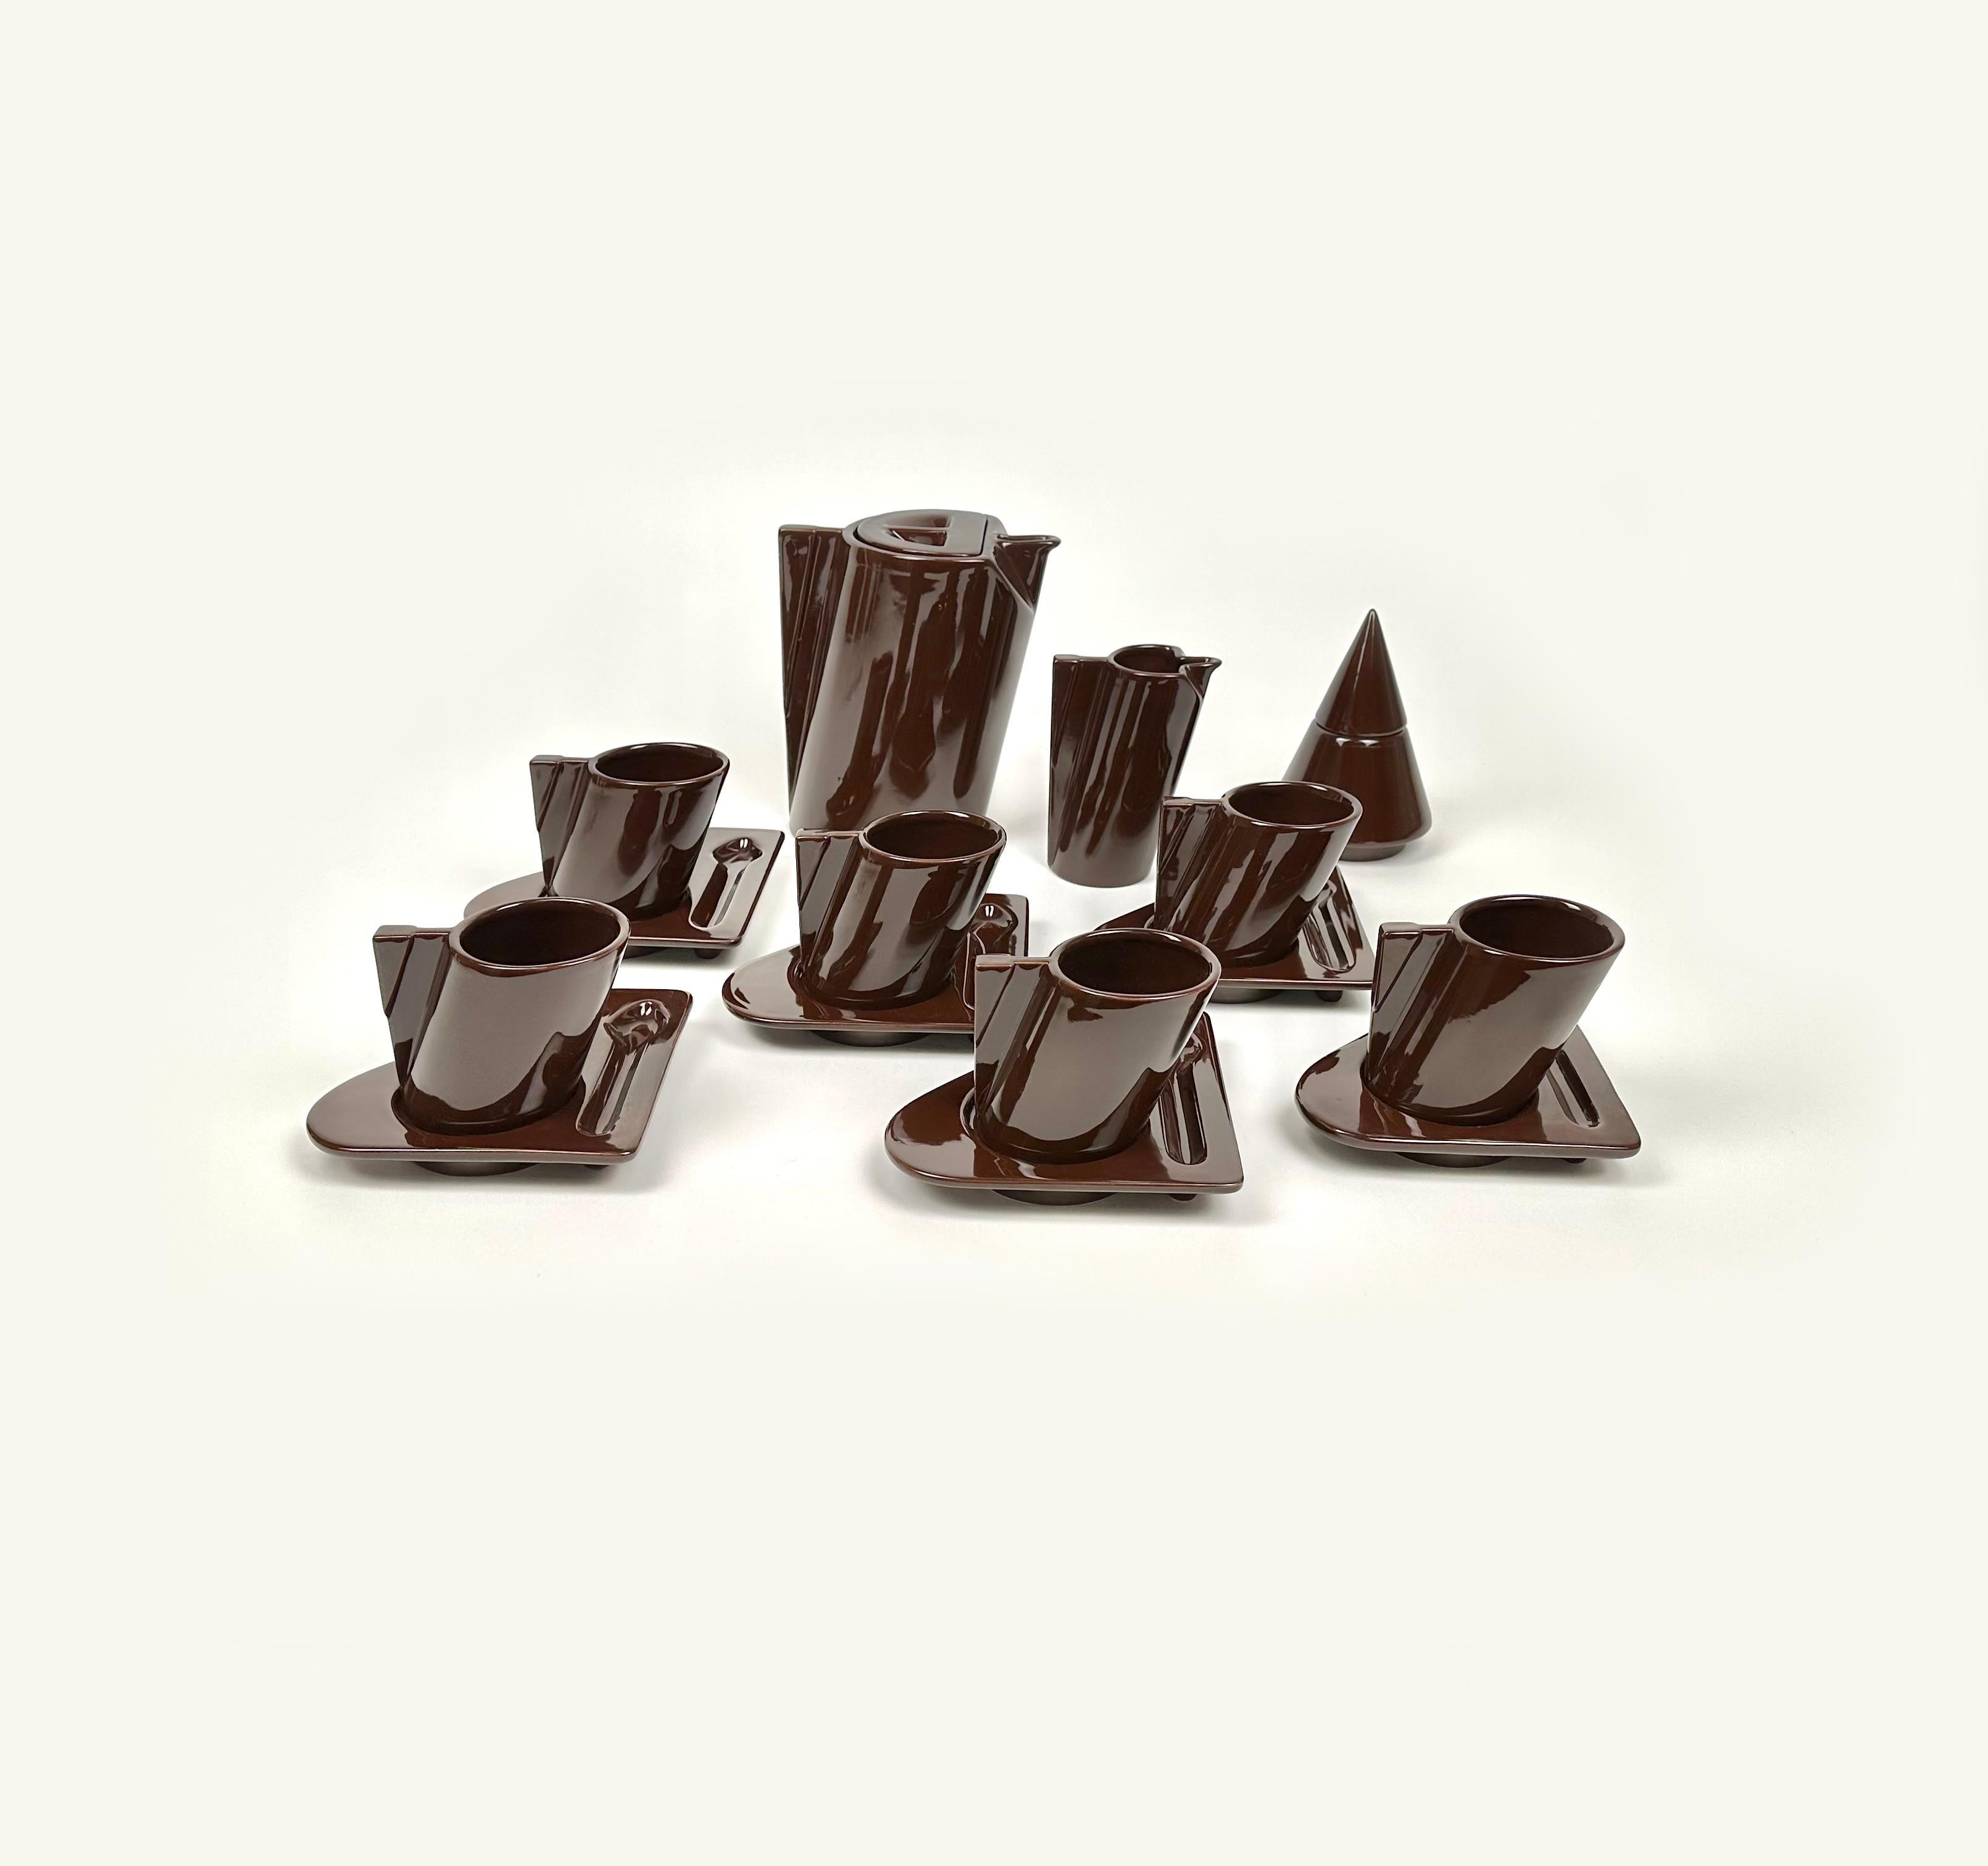 Futurist tea set in brown ceramic by Enzo Bioli for Il Picchio.

The set is composed of six cups with 6 saucers, 1 sugar pot, 1 tea pot and 1 milk pot.

Made in Italy in the 1960s.

The original signature is still visible on the bottom, as